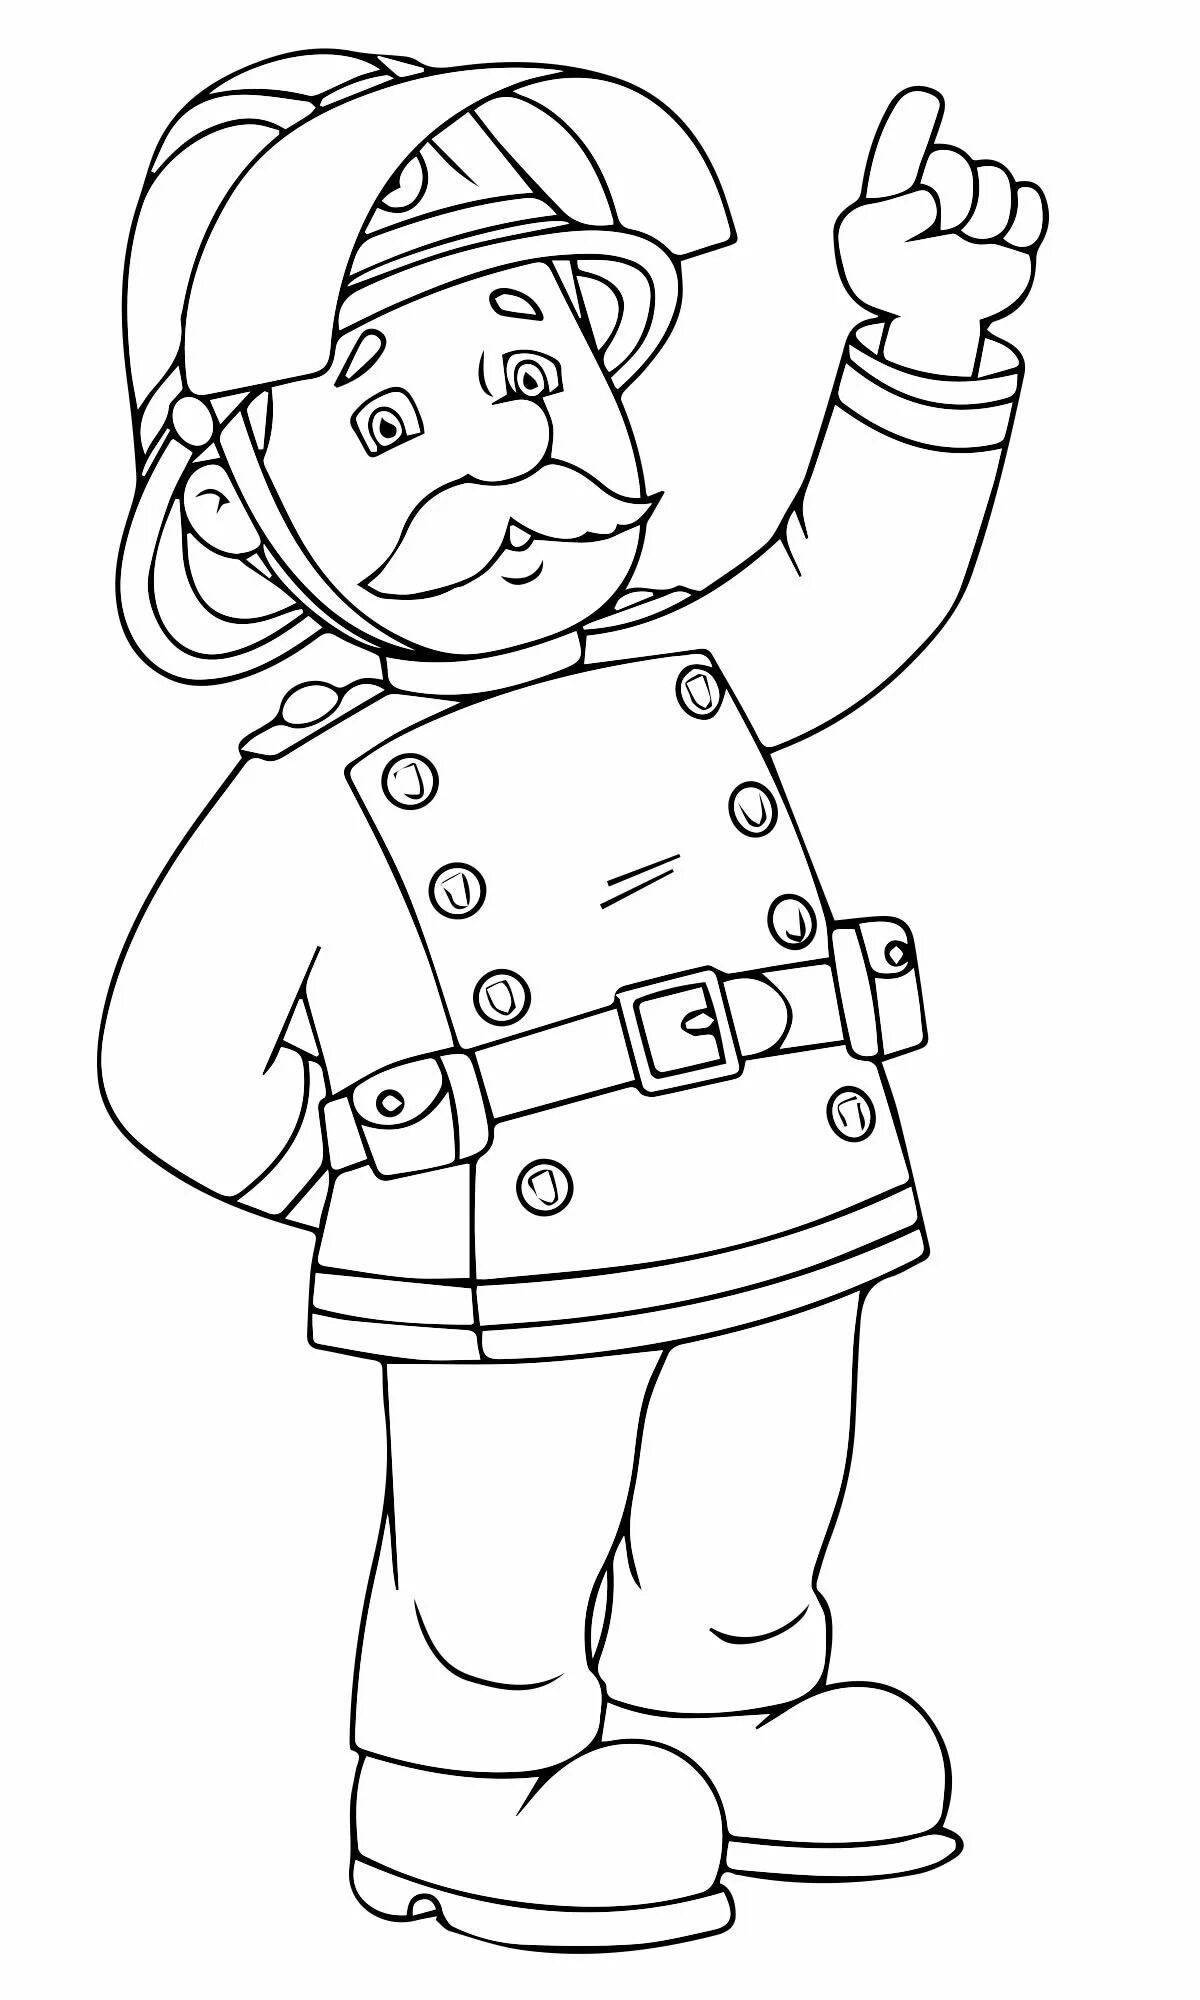 Inspirational firefighter profession coloring page